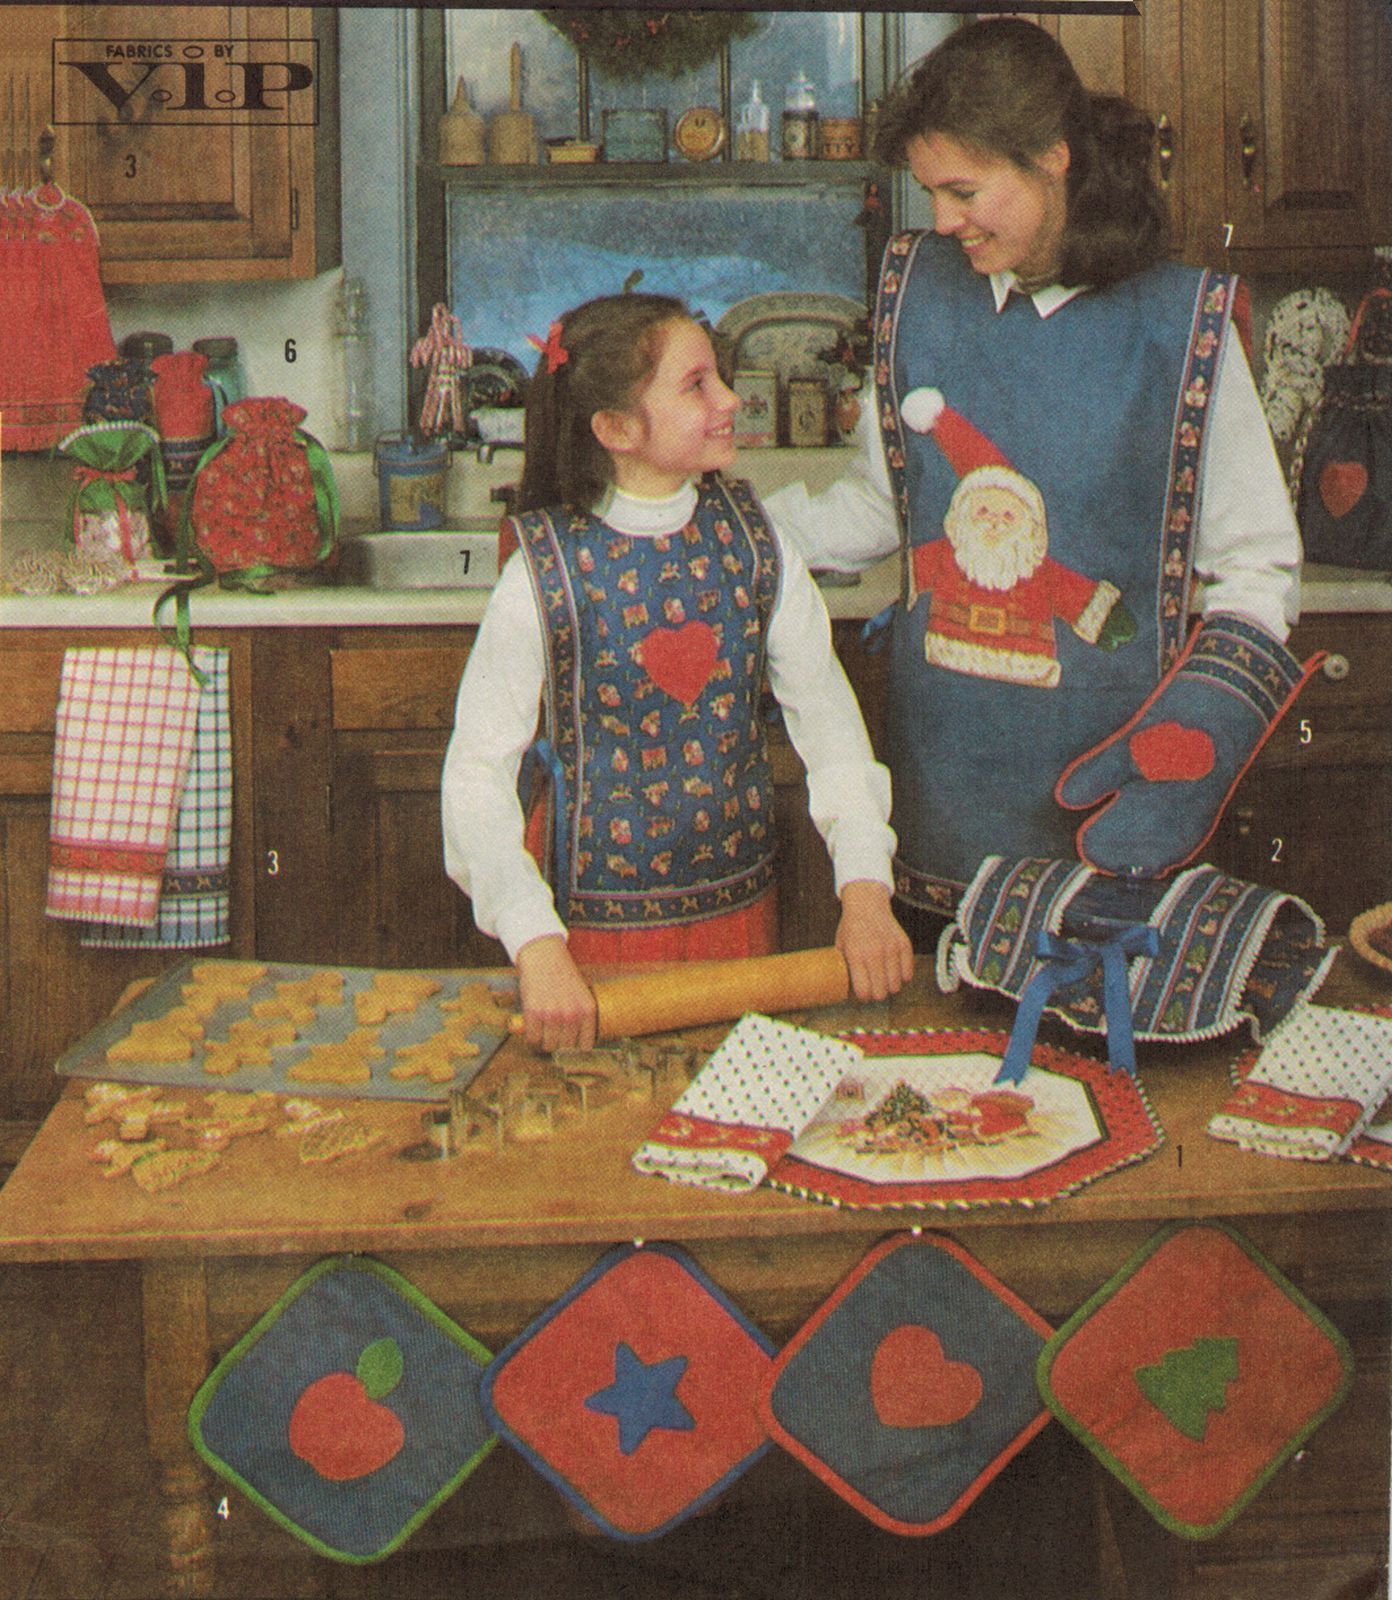 Vtg Christmas Place Mats Napkins Potholders Tabards Aprons Gift Bags Sew Pattern - $13.99